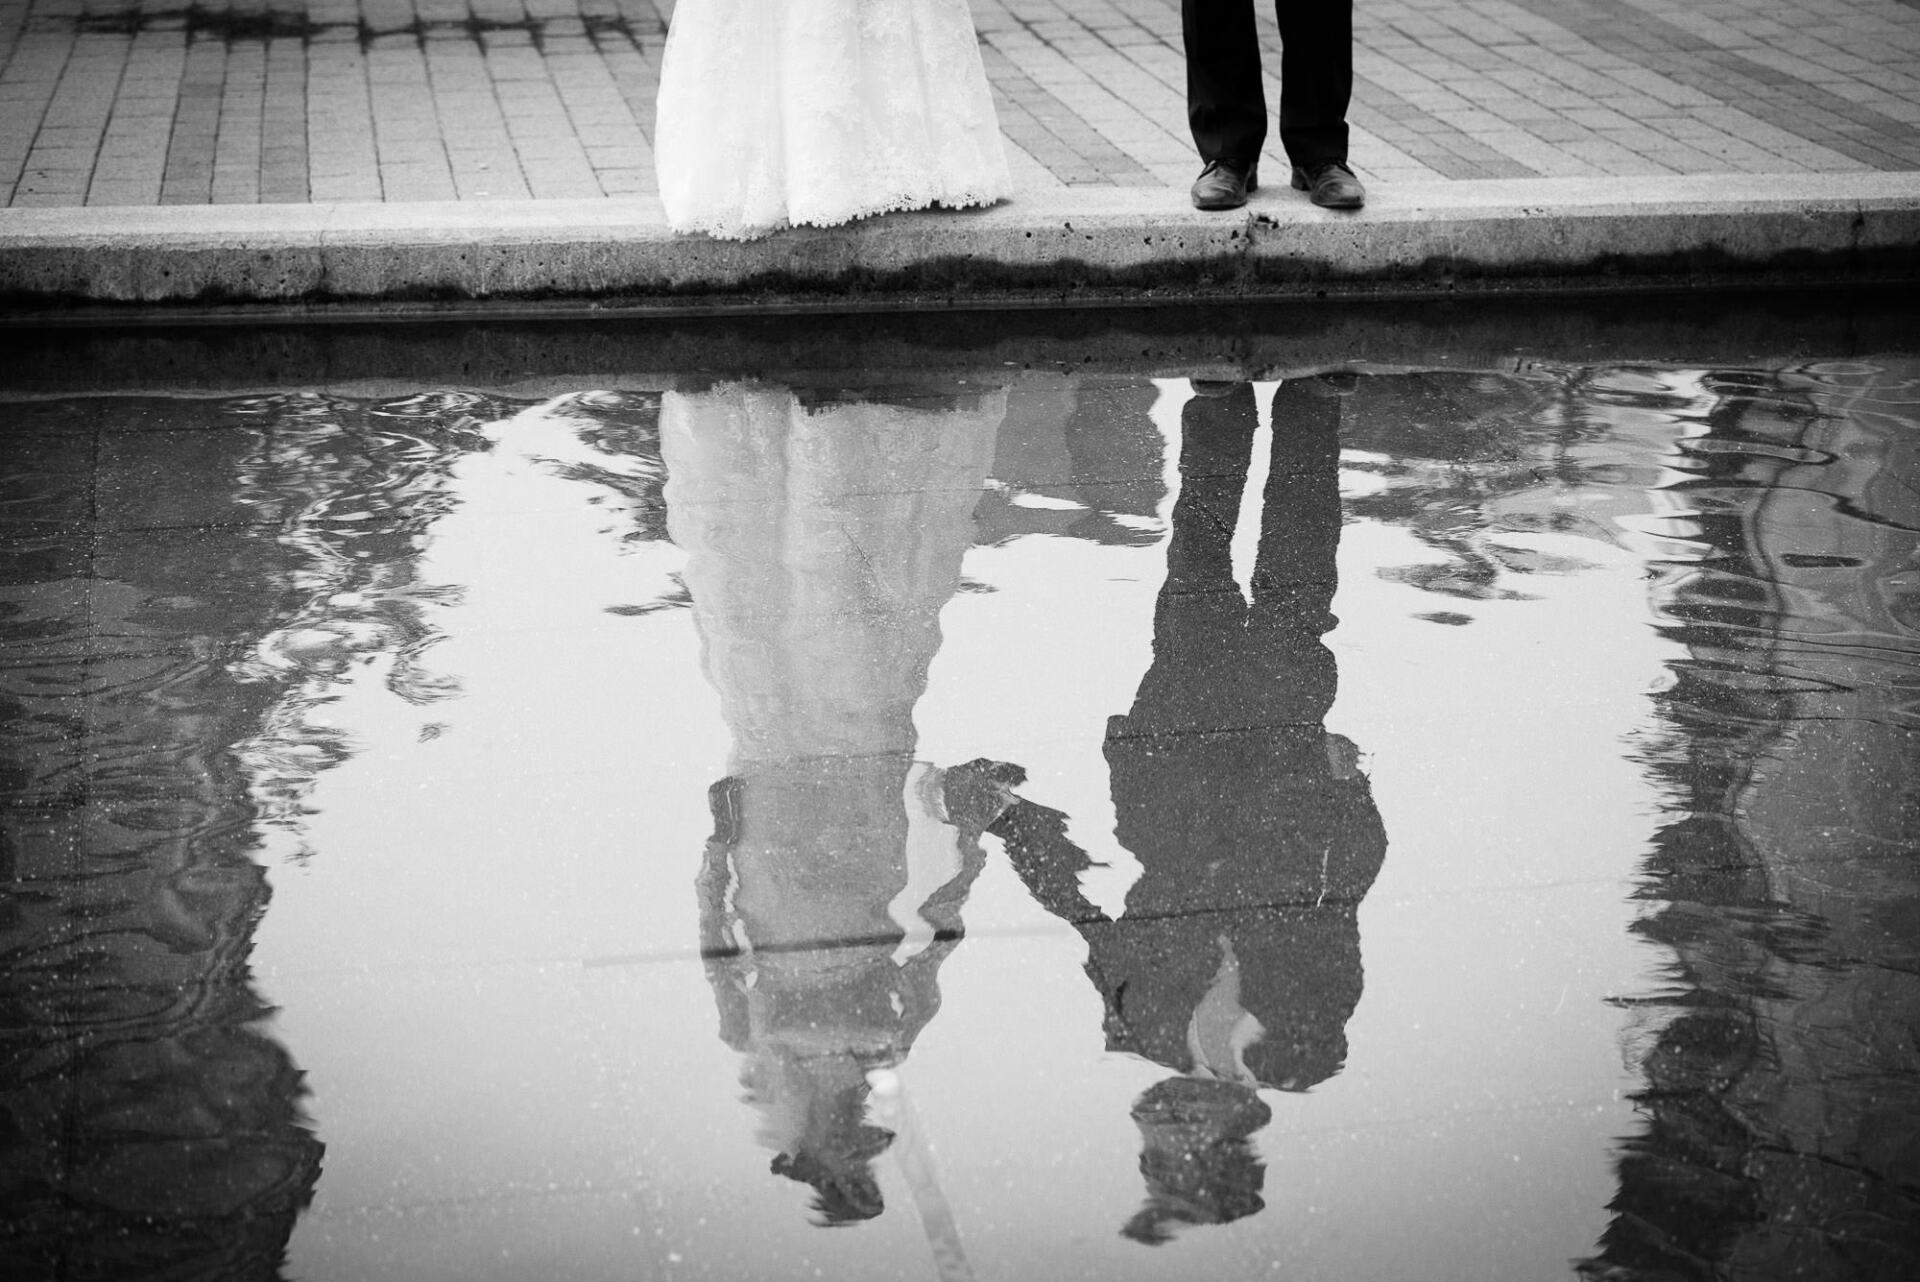 Reflection in the water of a bride and groom